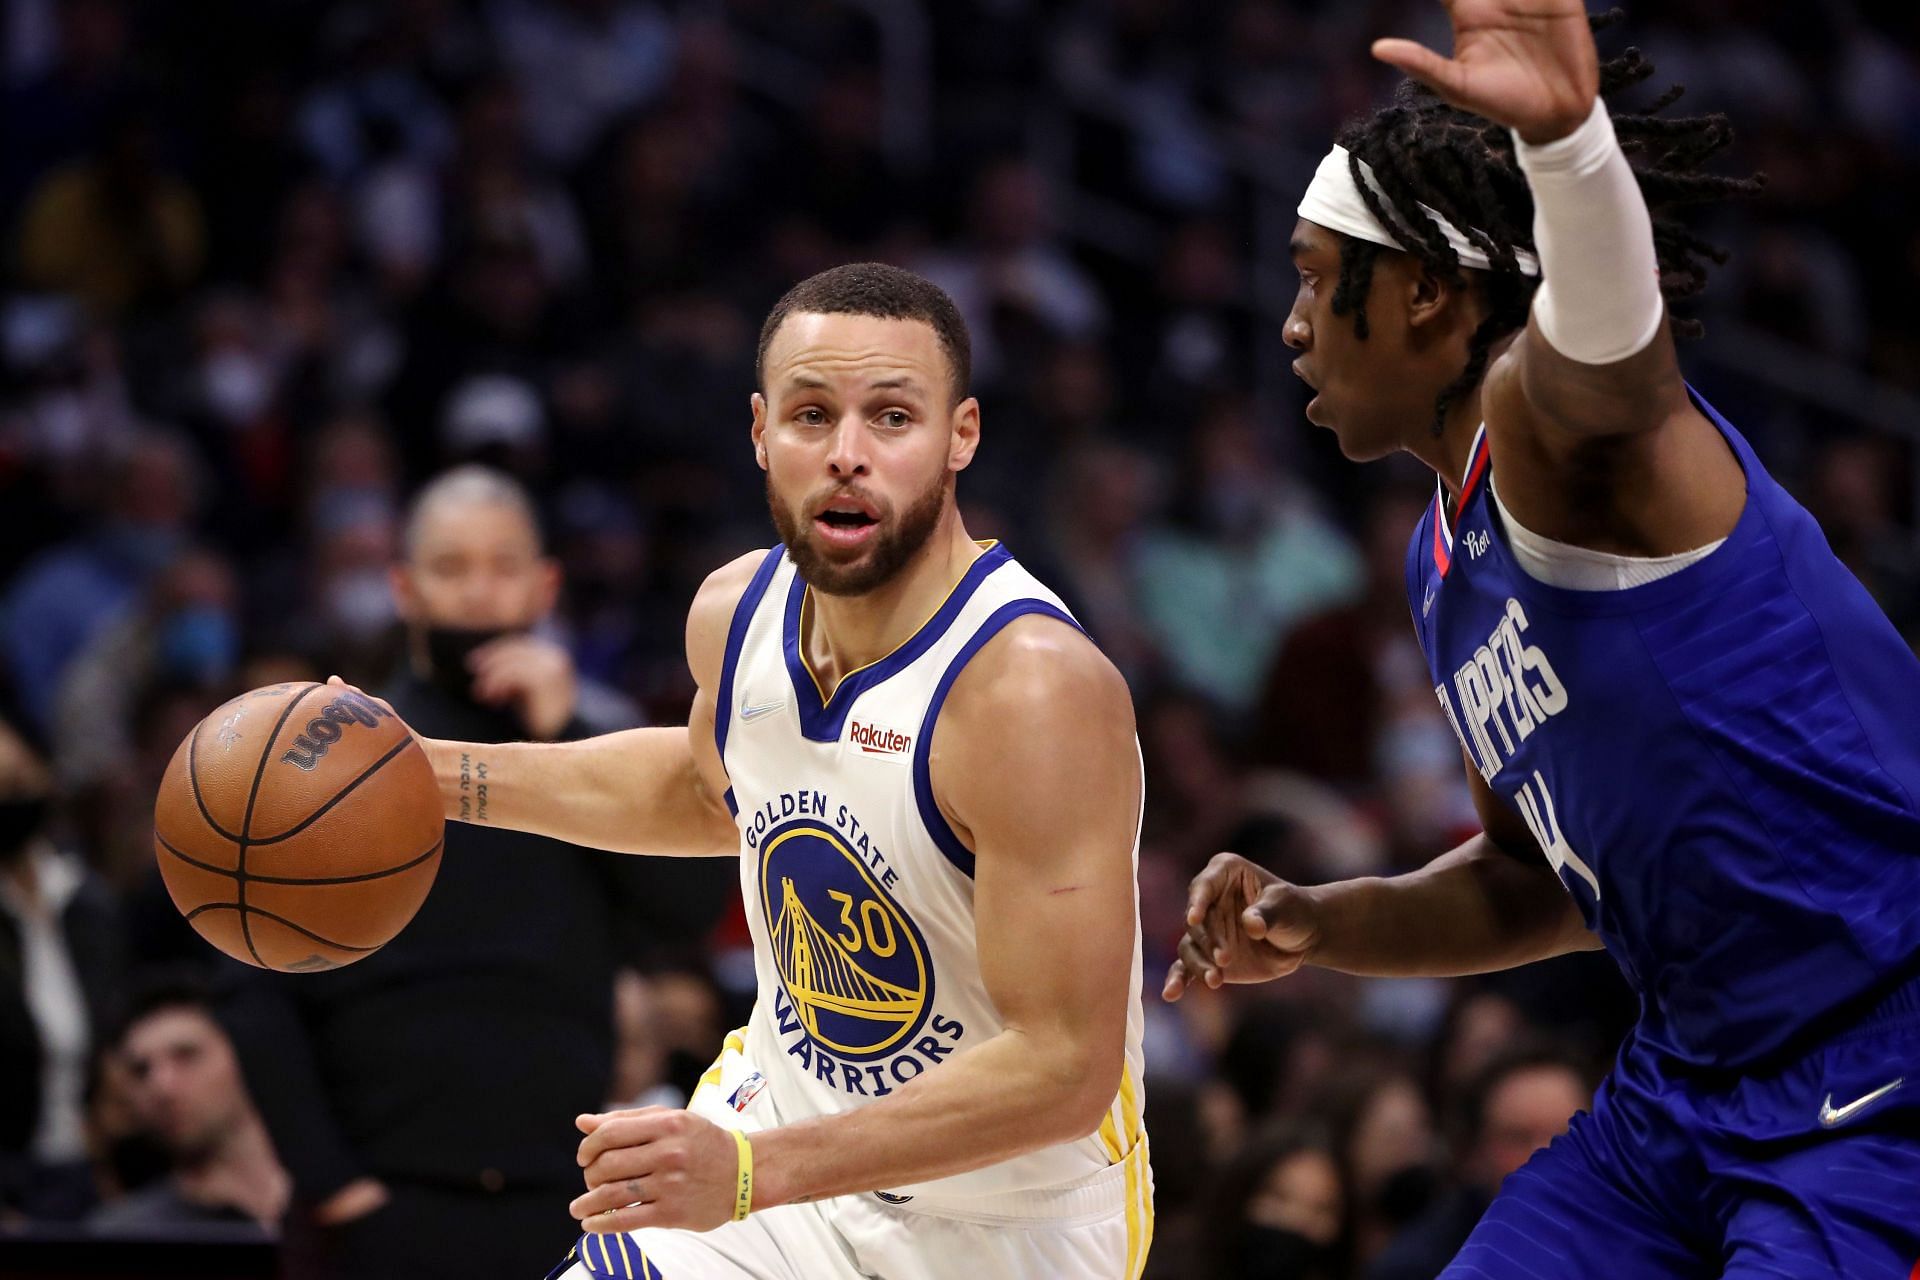 Steph Curry Shares First Post After 4th Ring - Inside the Warriors